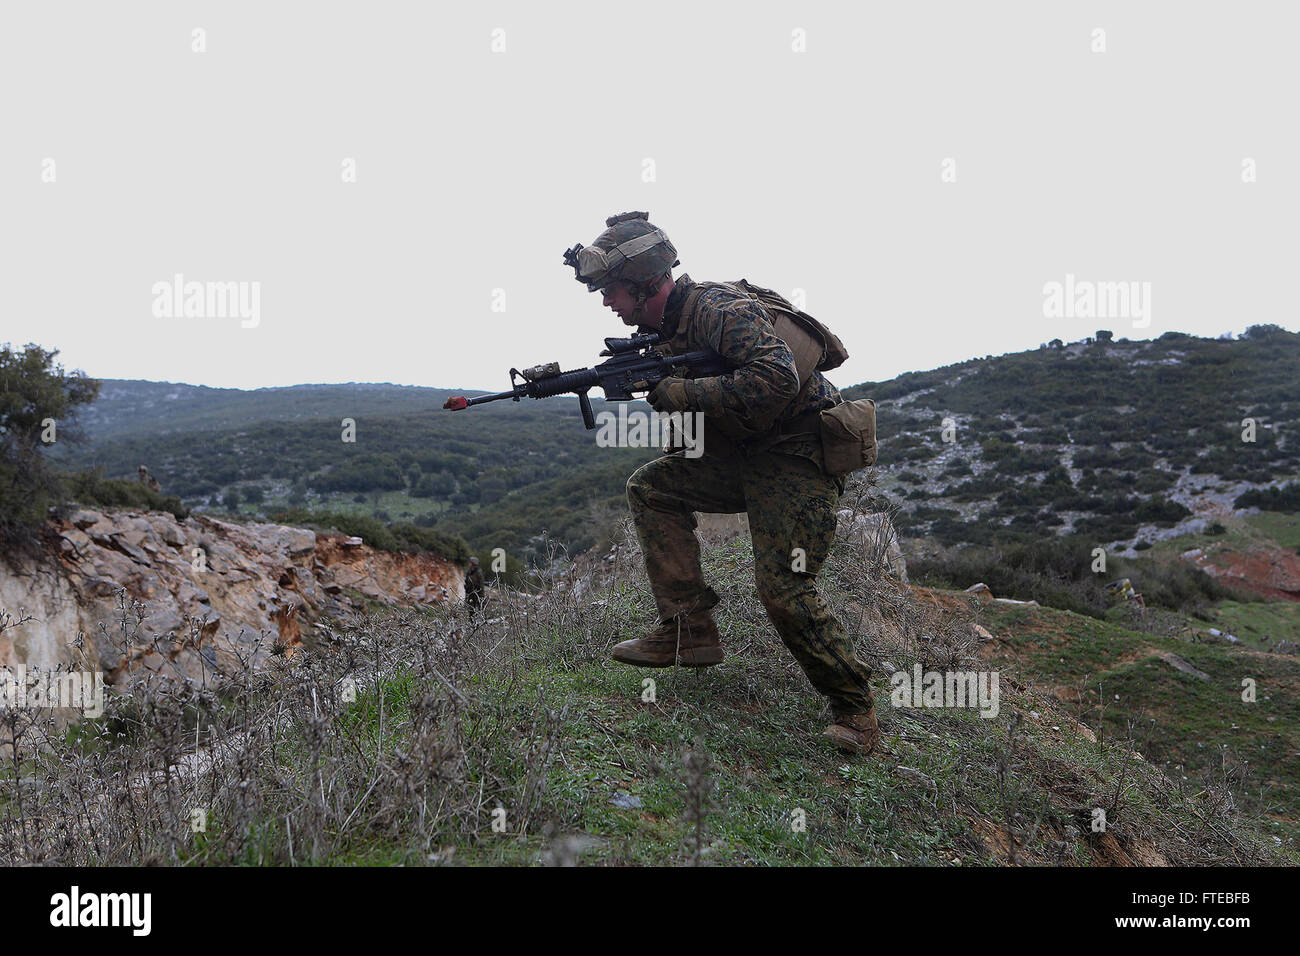 140309-M-WB921-492 GREECE (March 9, 2014) - A U.S. Marine with Battalion Landing Team 1st Battalion, 6th Marine Regiment, 22nd Marine Expeditionary Unit (MEU), assaults a hill during a bilateral training exercise with the Hellenic Army. The U.S. and Greece regularly conduct scheduled military exercises to strengthen professional and personal relationships. The MEU is deployed to the U.S. 6th Fleet area of operations with the Bataan Amphibious Ready Group as a sea-based, expeditionary crisis response force capable of conducting amphibious missions across the full range of military operations. ( Stock Photo